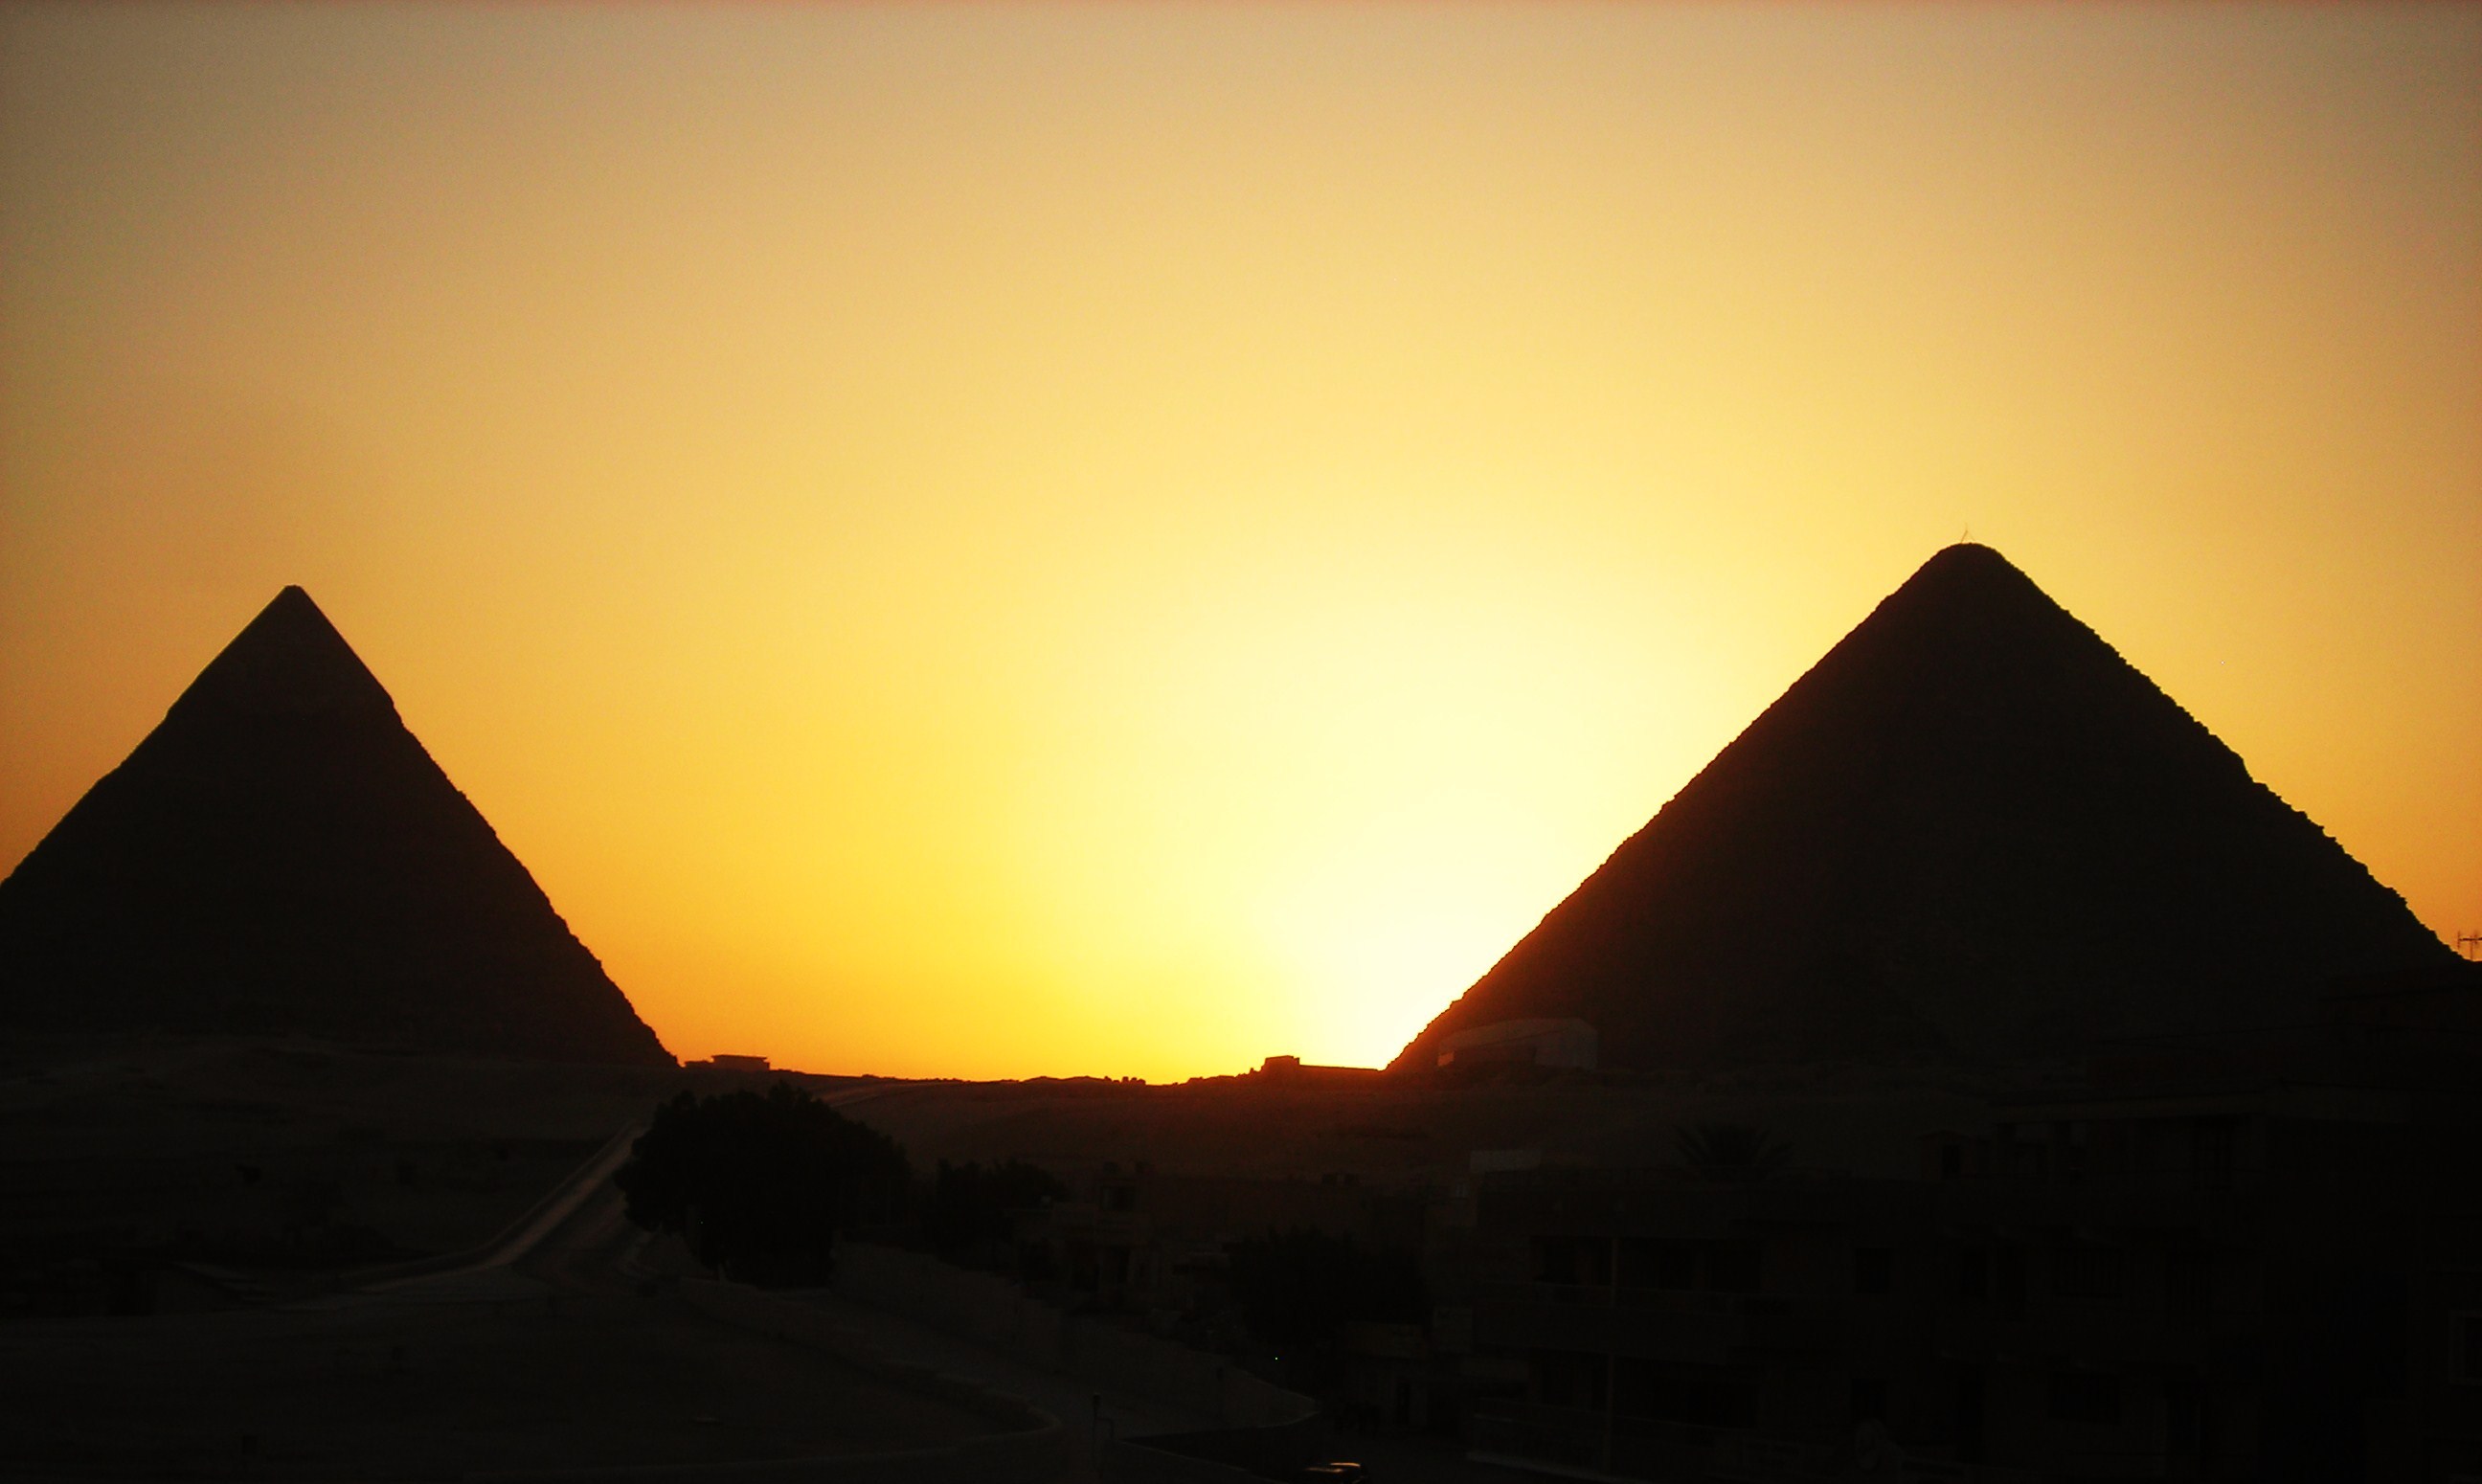 wallpaper pictures hd,pyramid,sky,monument,sunset,landscape